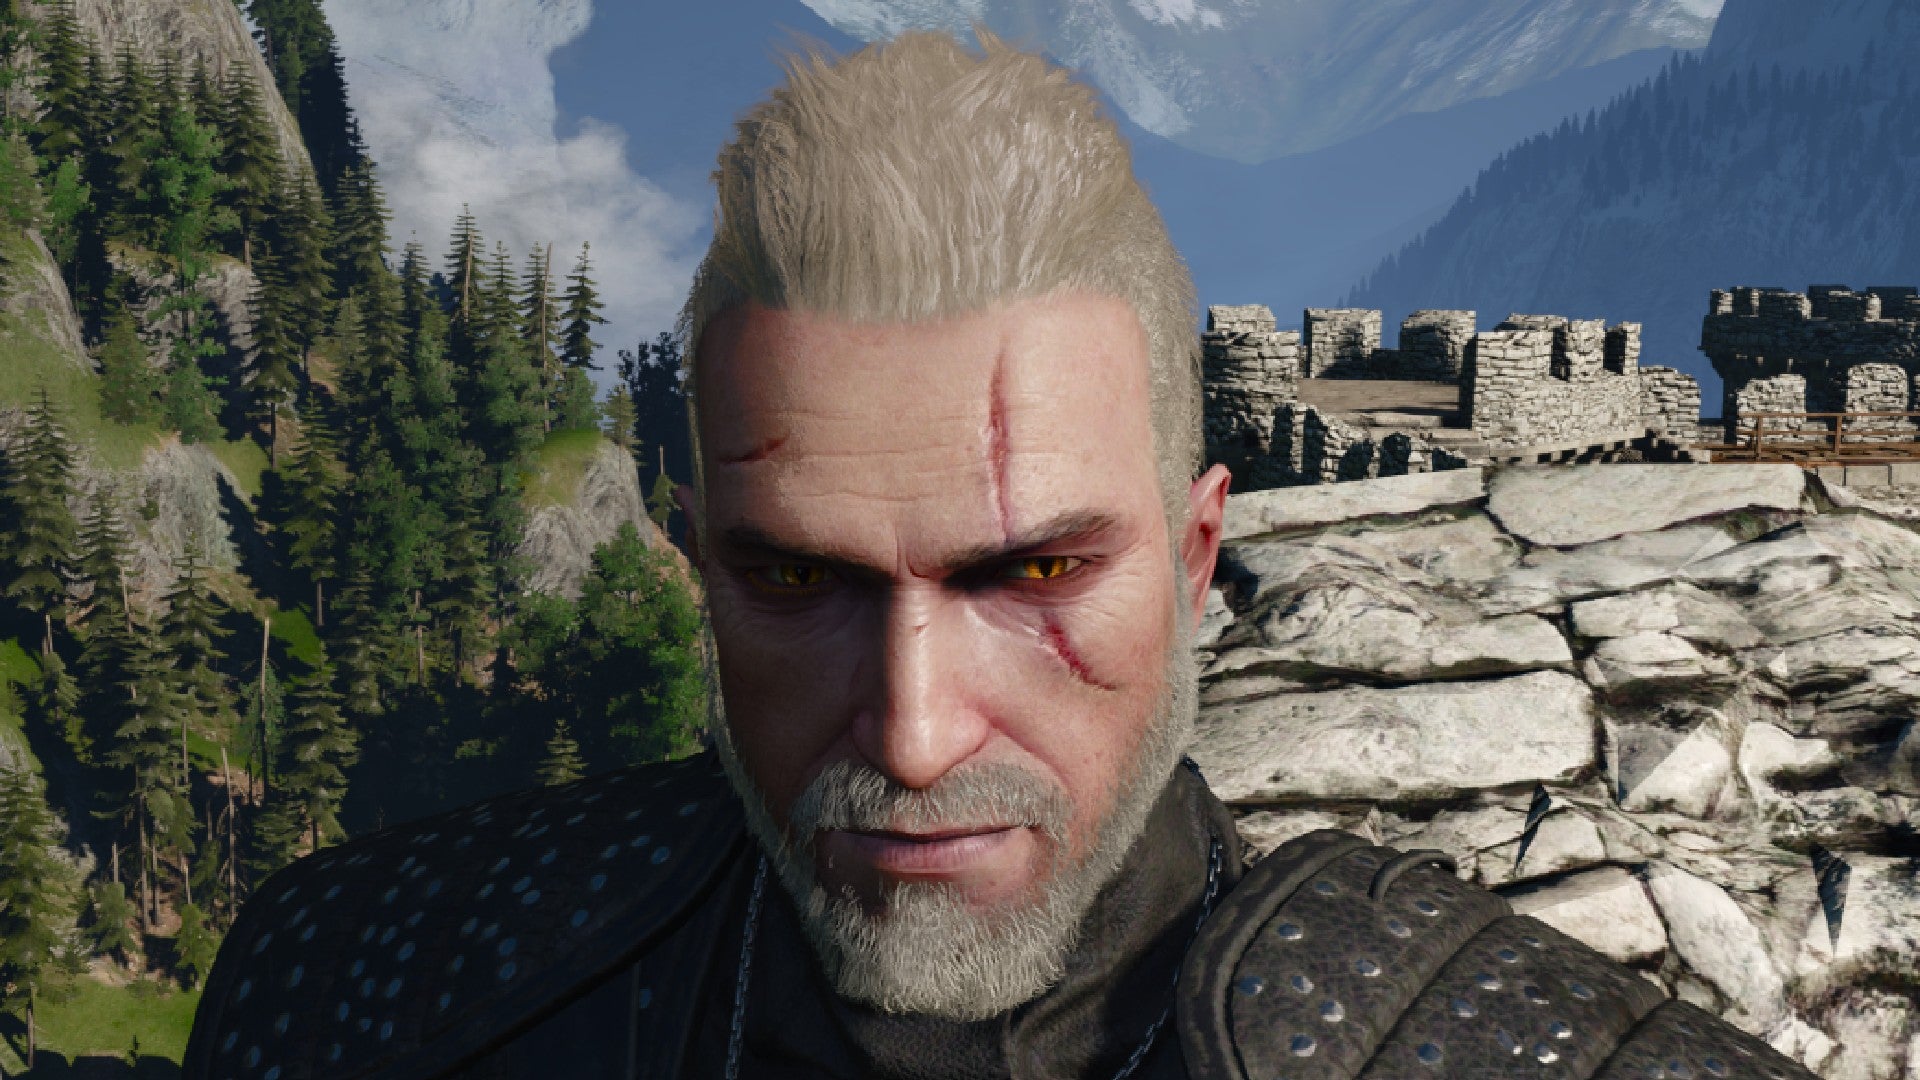 Witcher 3 screenshot showing Geralt's mohawk and ponytail haircut from the front.